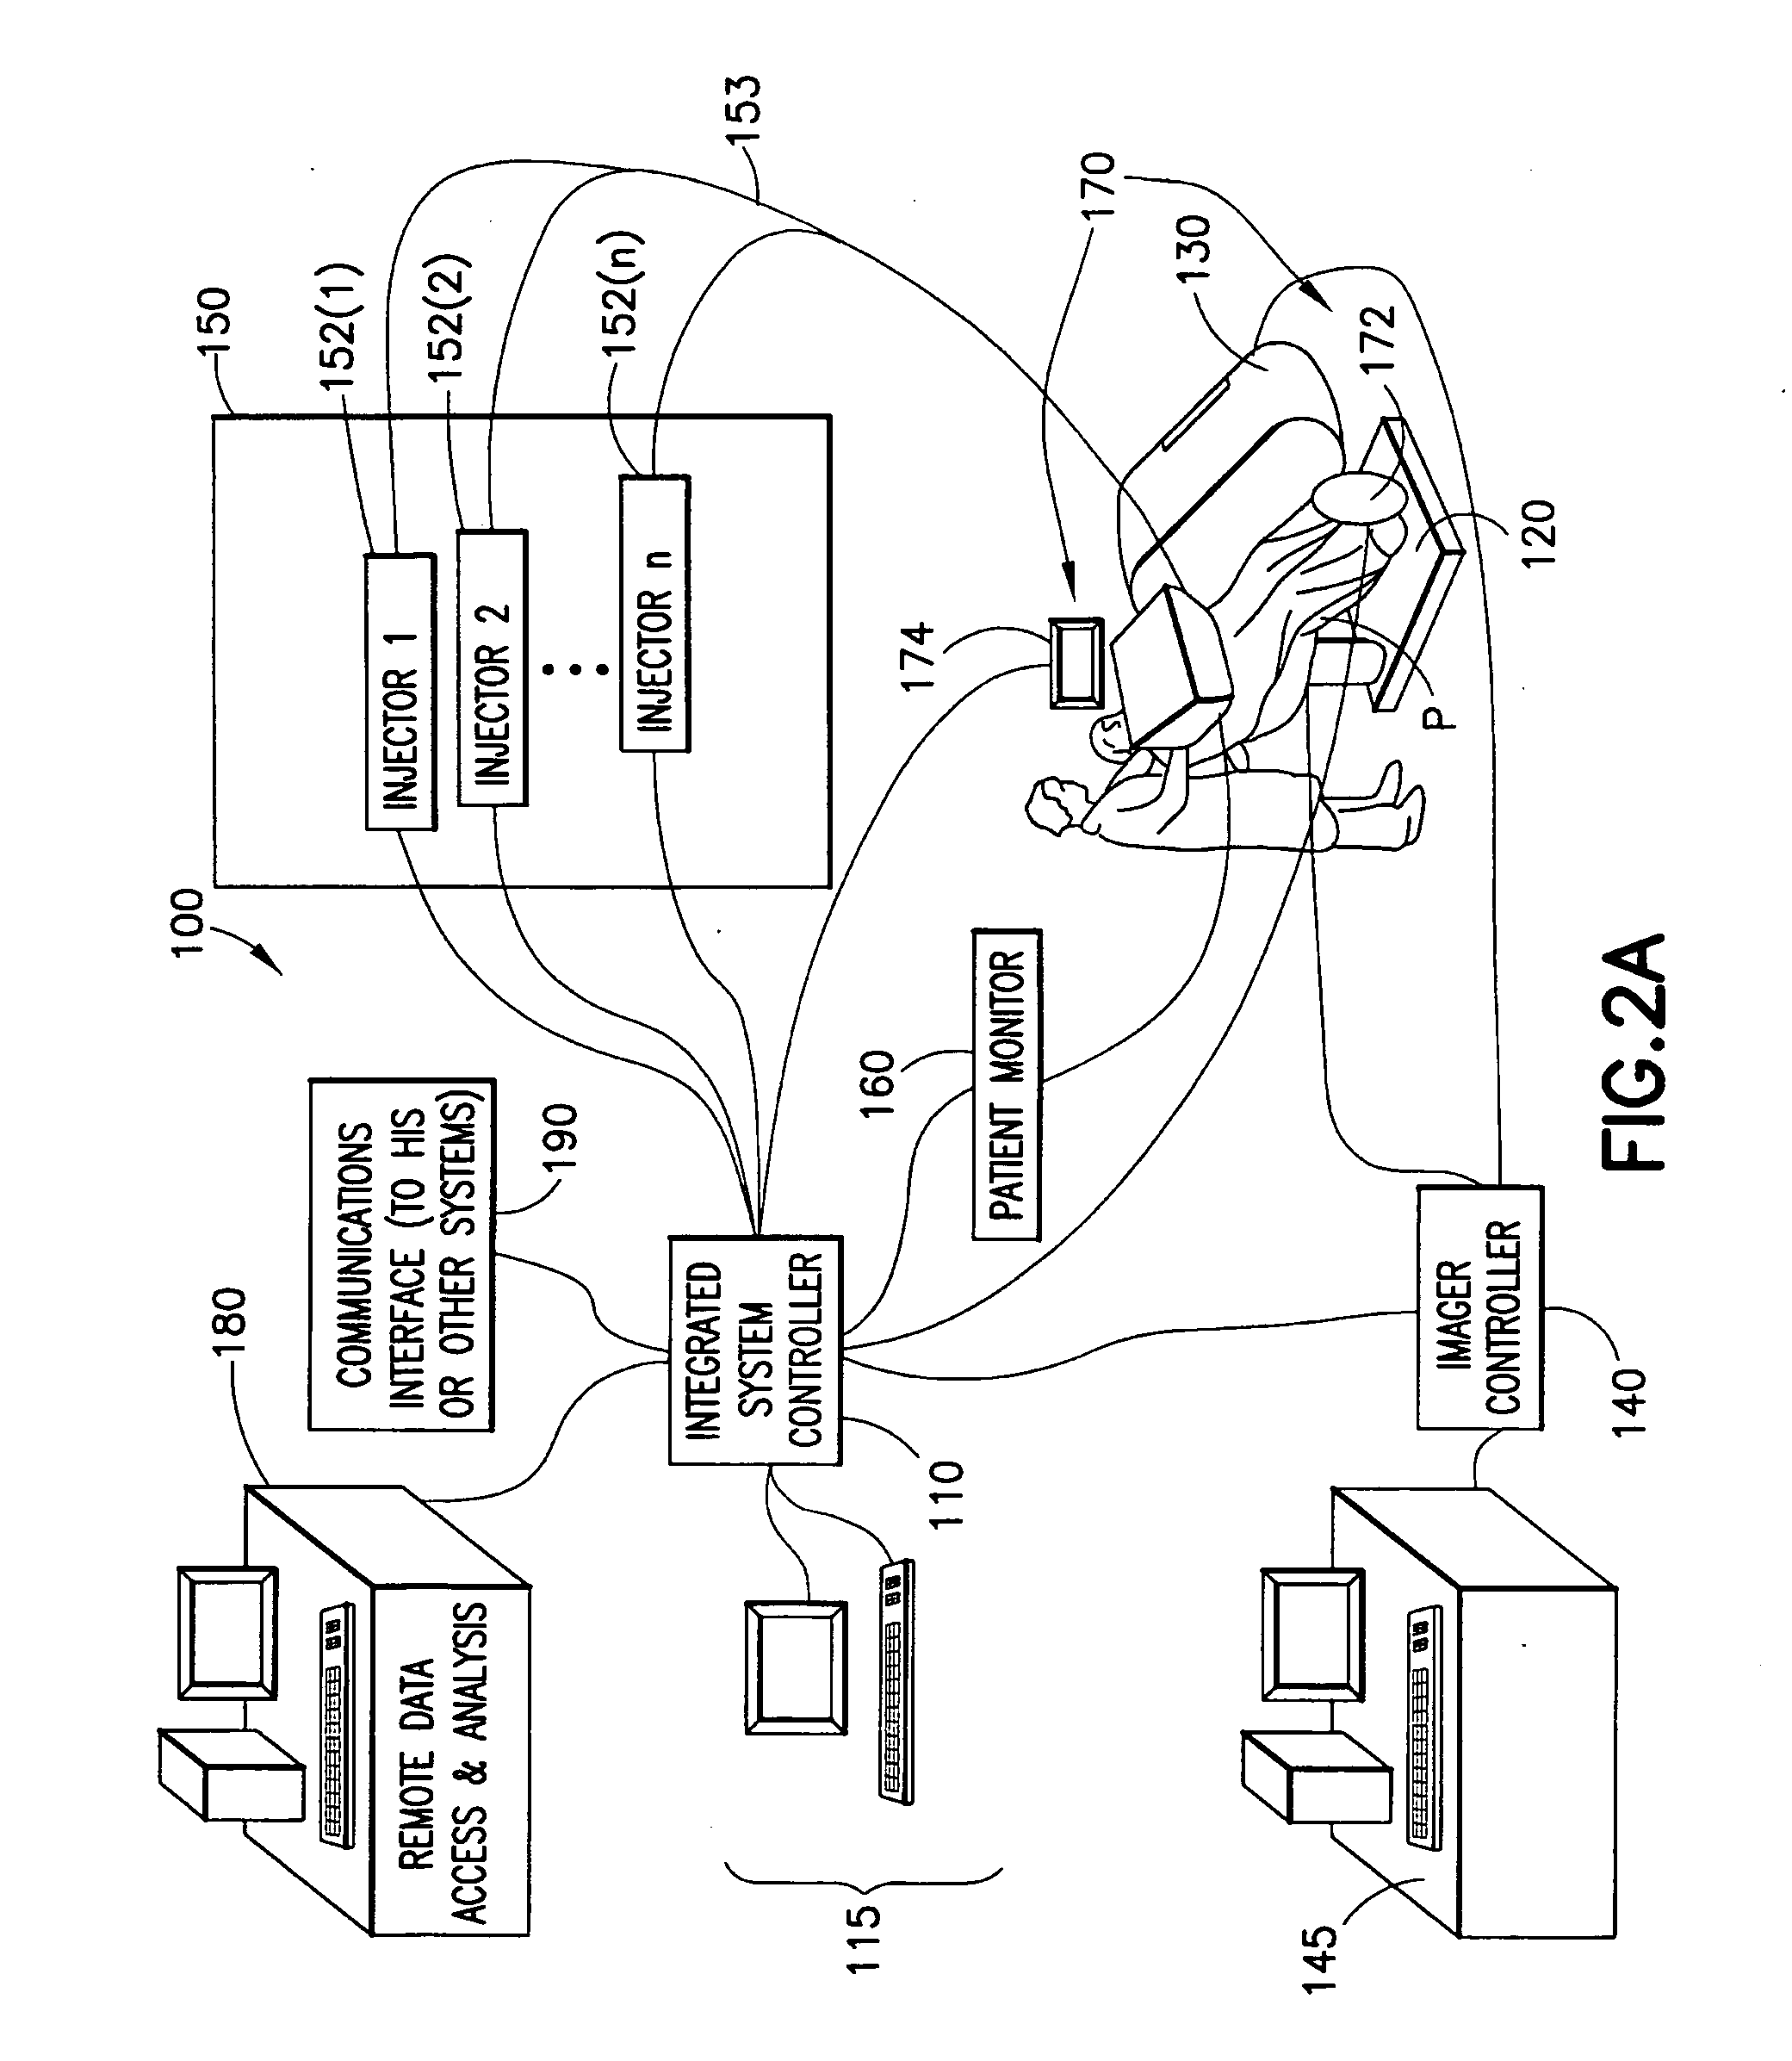 Systems For Integrated Radiopharmaceutical Generation, Preparation, Transportation and Administration